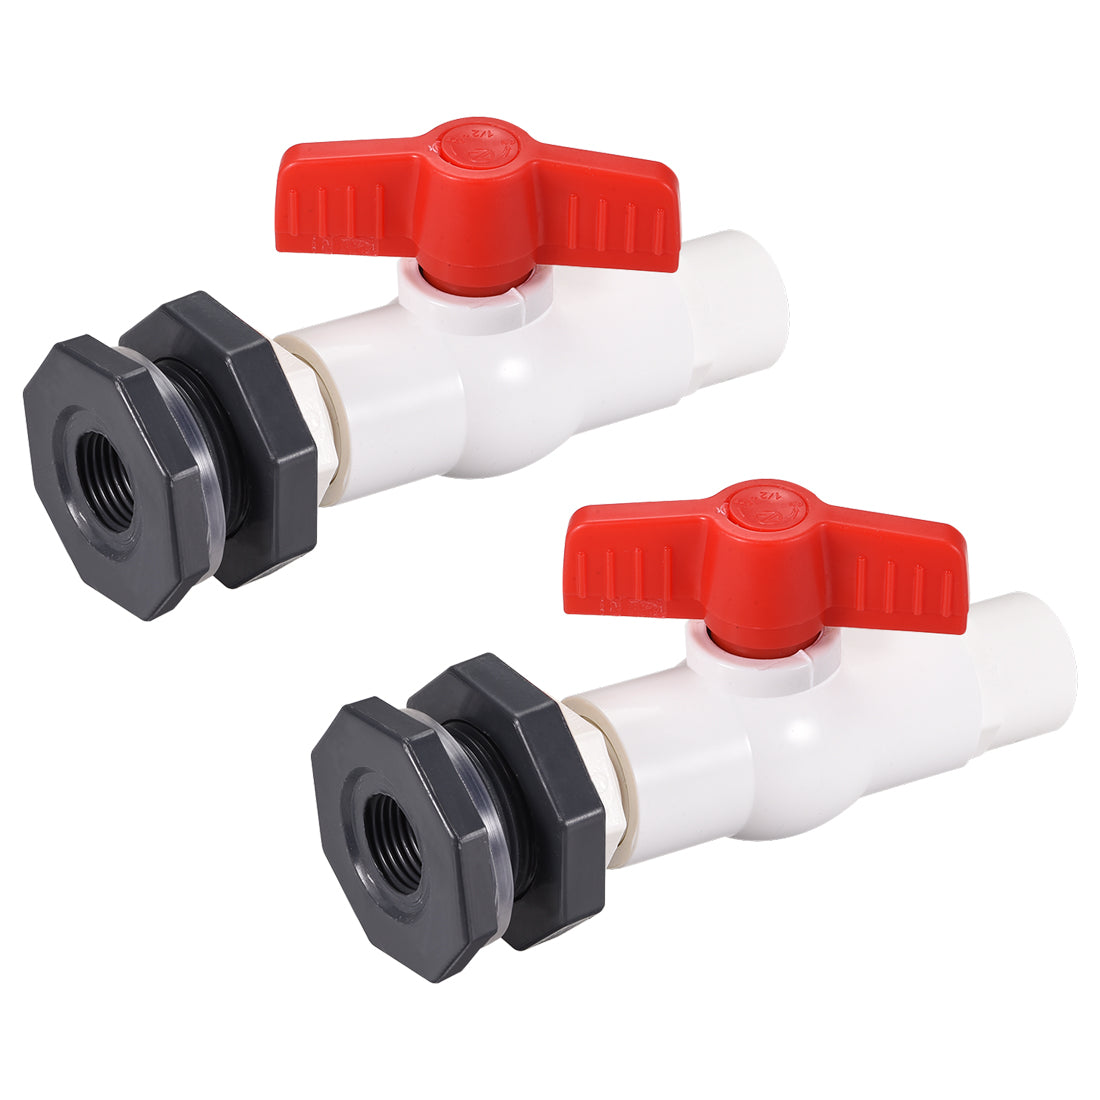 uxcell Uxcell PVC Ball Valve Connector Spigot Kit G1/2, with Bulkhead, Grey White Red 2Pcs